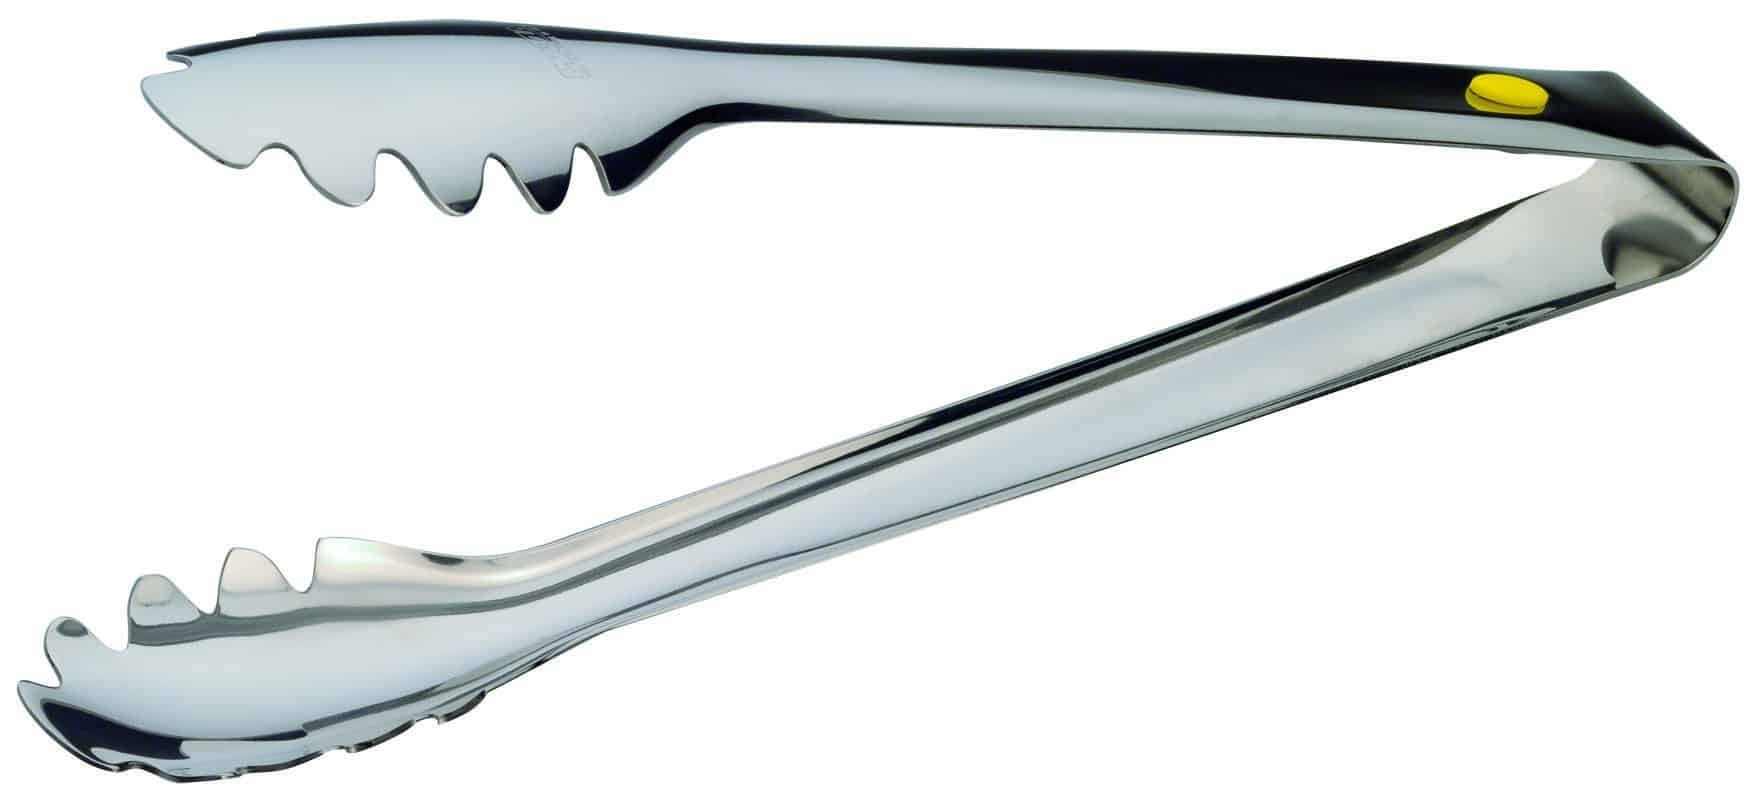 UNIVERSAL KITCHEN TONG 23,5 S/S 18/10 PIAZZA ITALY